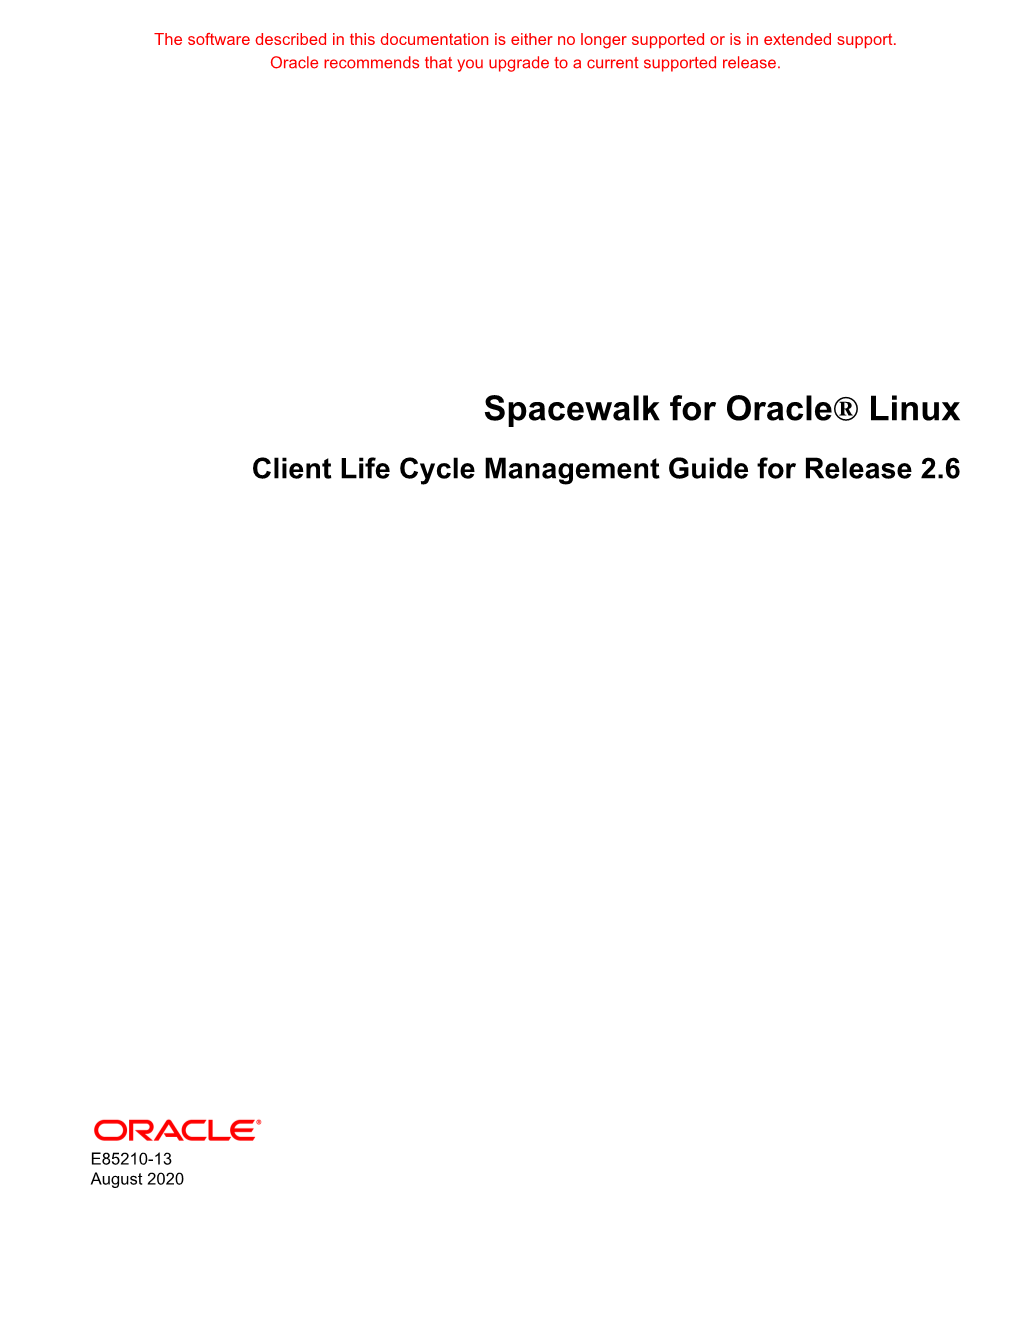 Spacewalk for Oracle® Linux Client Life Cycle Management Guide for Release 2.6